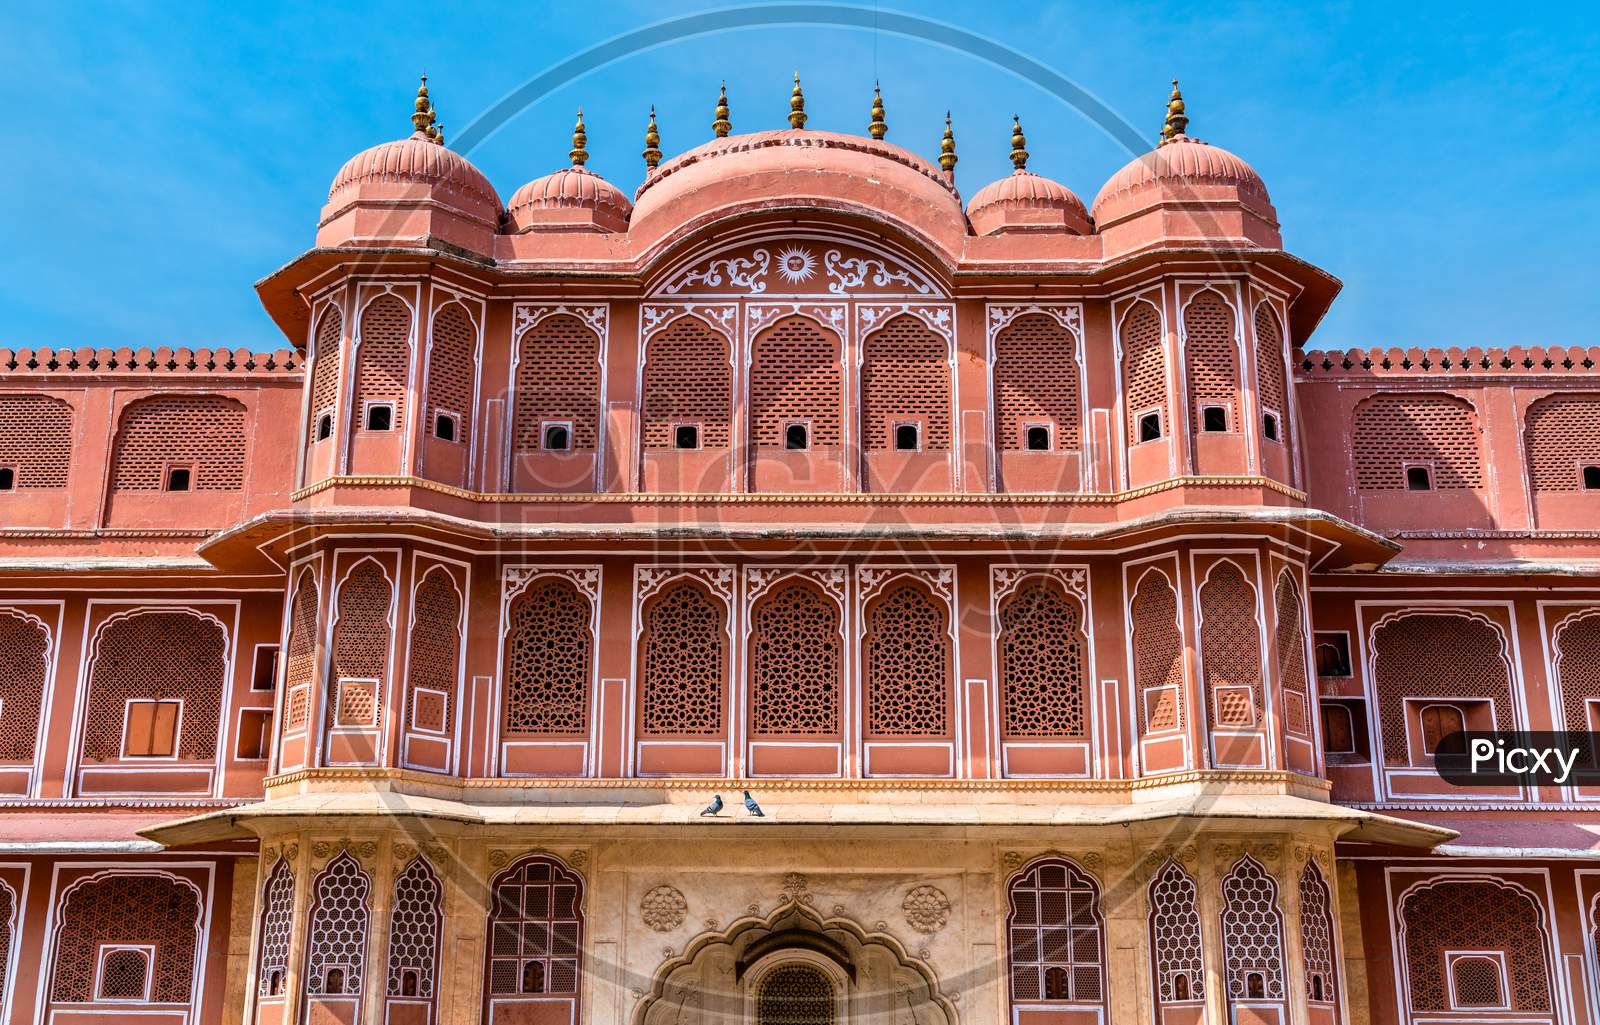 Image of Walls Of City Palace In Jaipur - Rajasthan, India-KR318771-Picxy